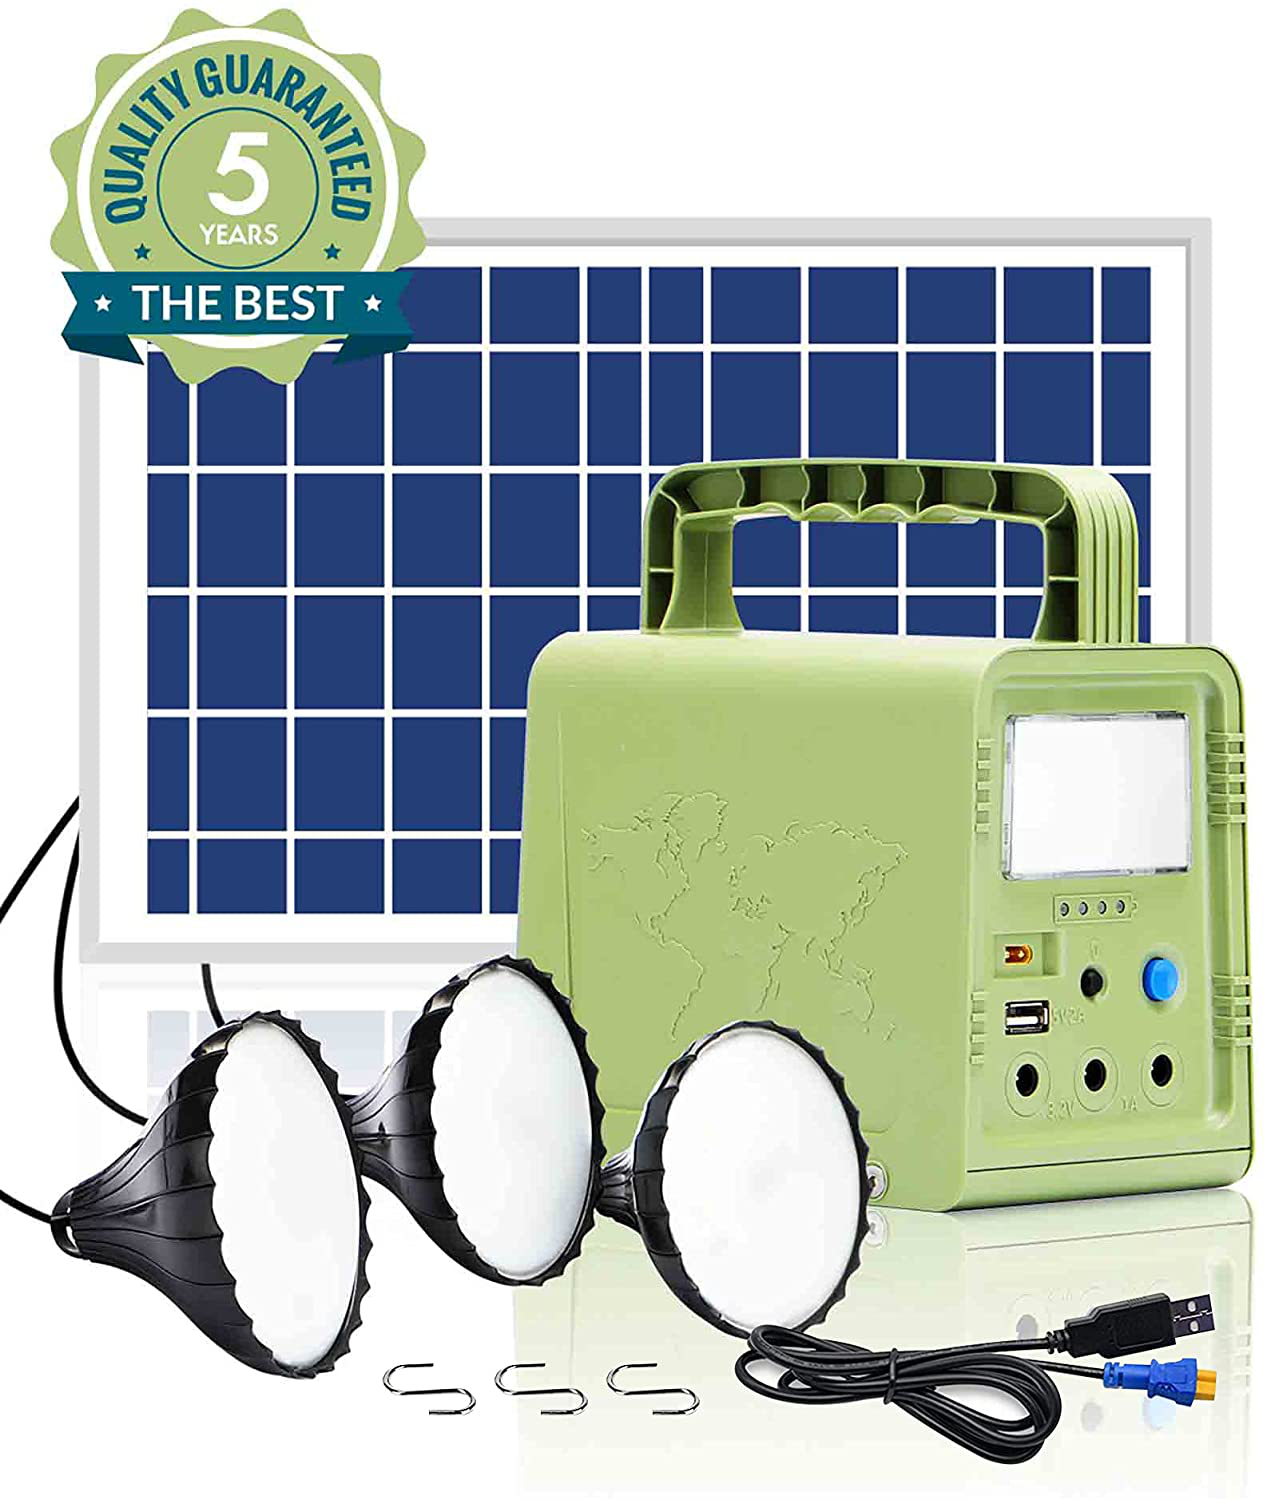 Portable Solar Generator, WAWUI Portable Power Station with Solar Panel & Flashlights, Camping Lights with Battery, USB DC Outlets, Solar Panels 84Wh for Outdoor Travel(84Wh)